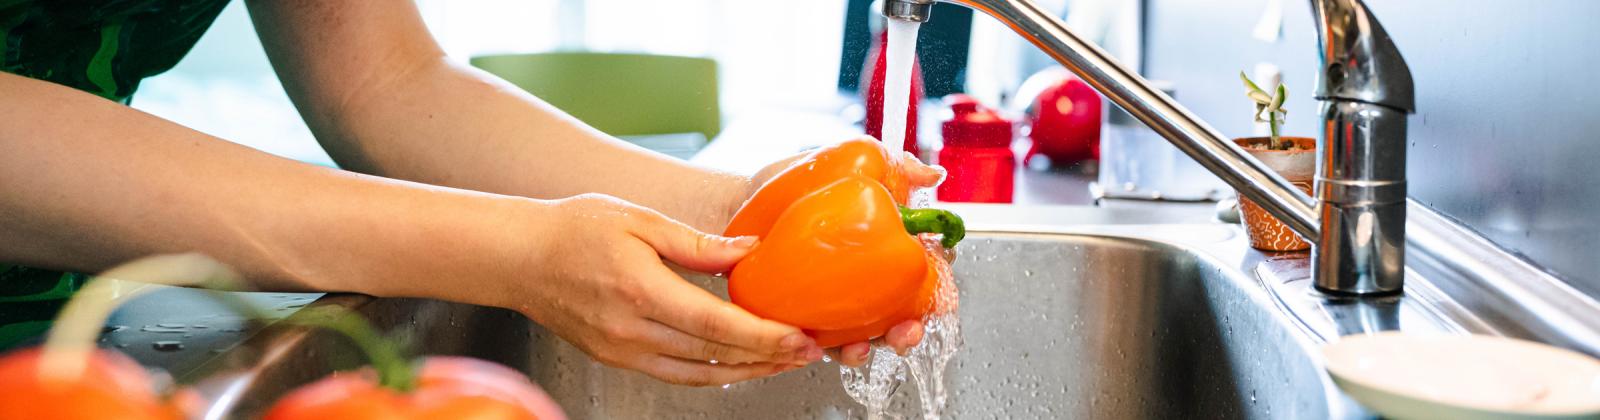 student washing a pepper in her dorm room